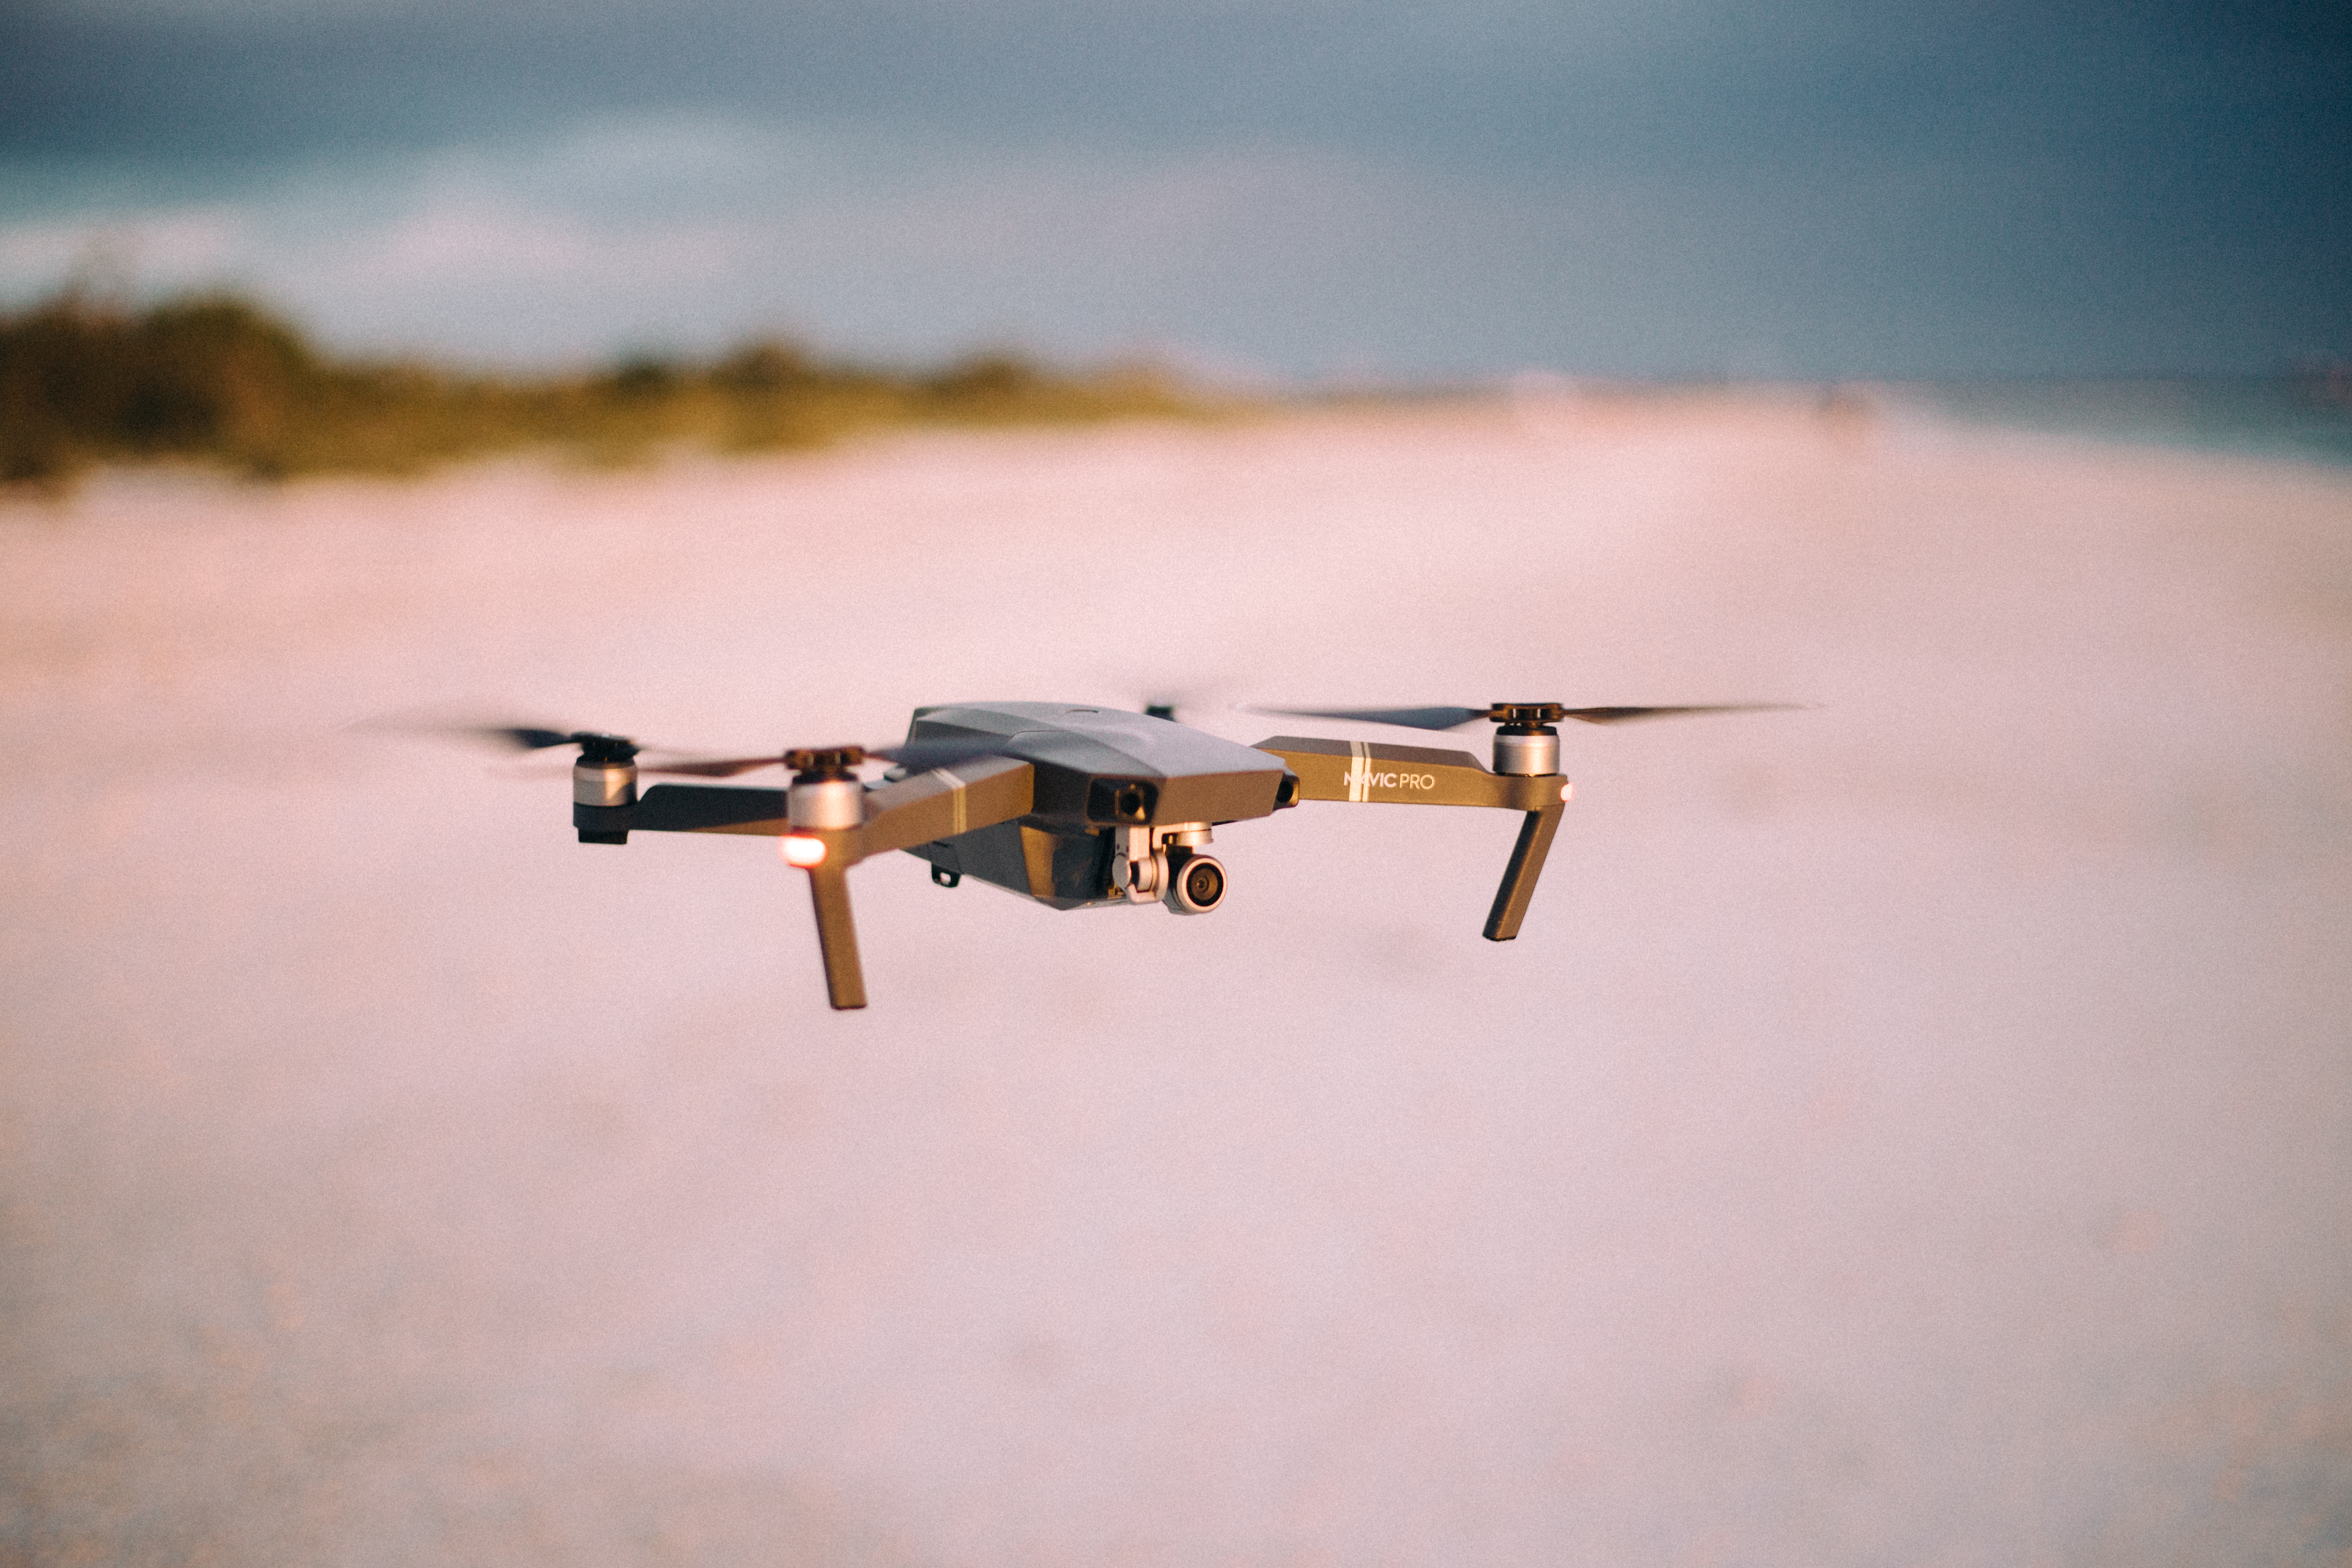 Drone Insurance and Liability Coverage: Do You Need It?